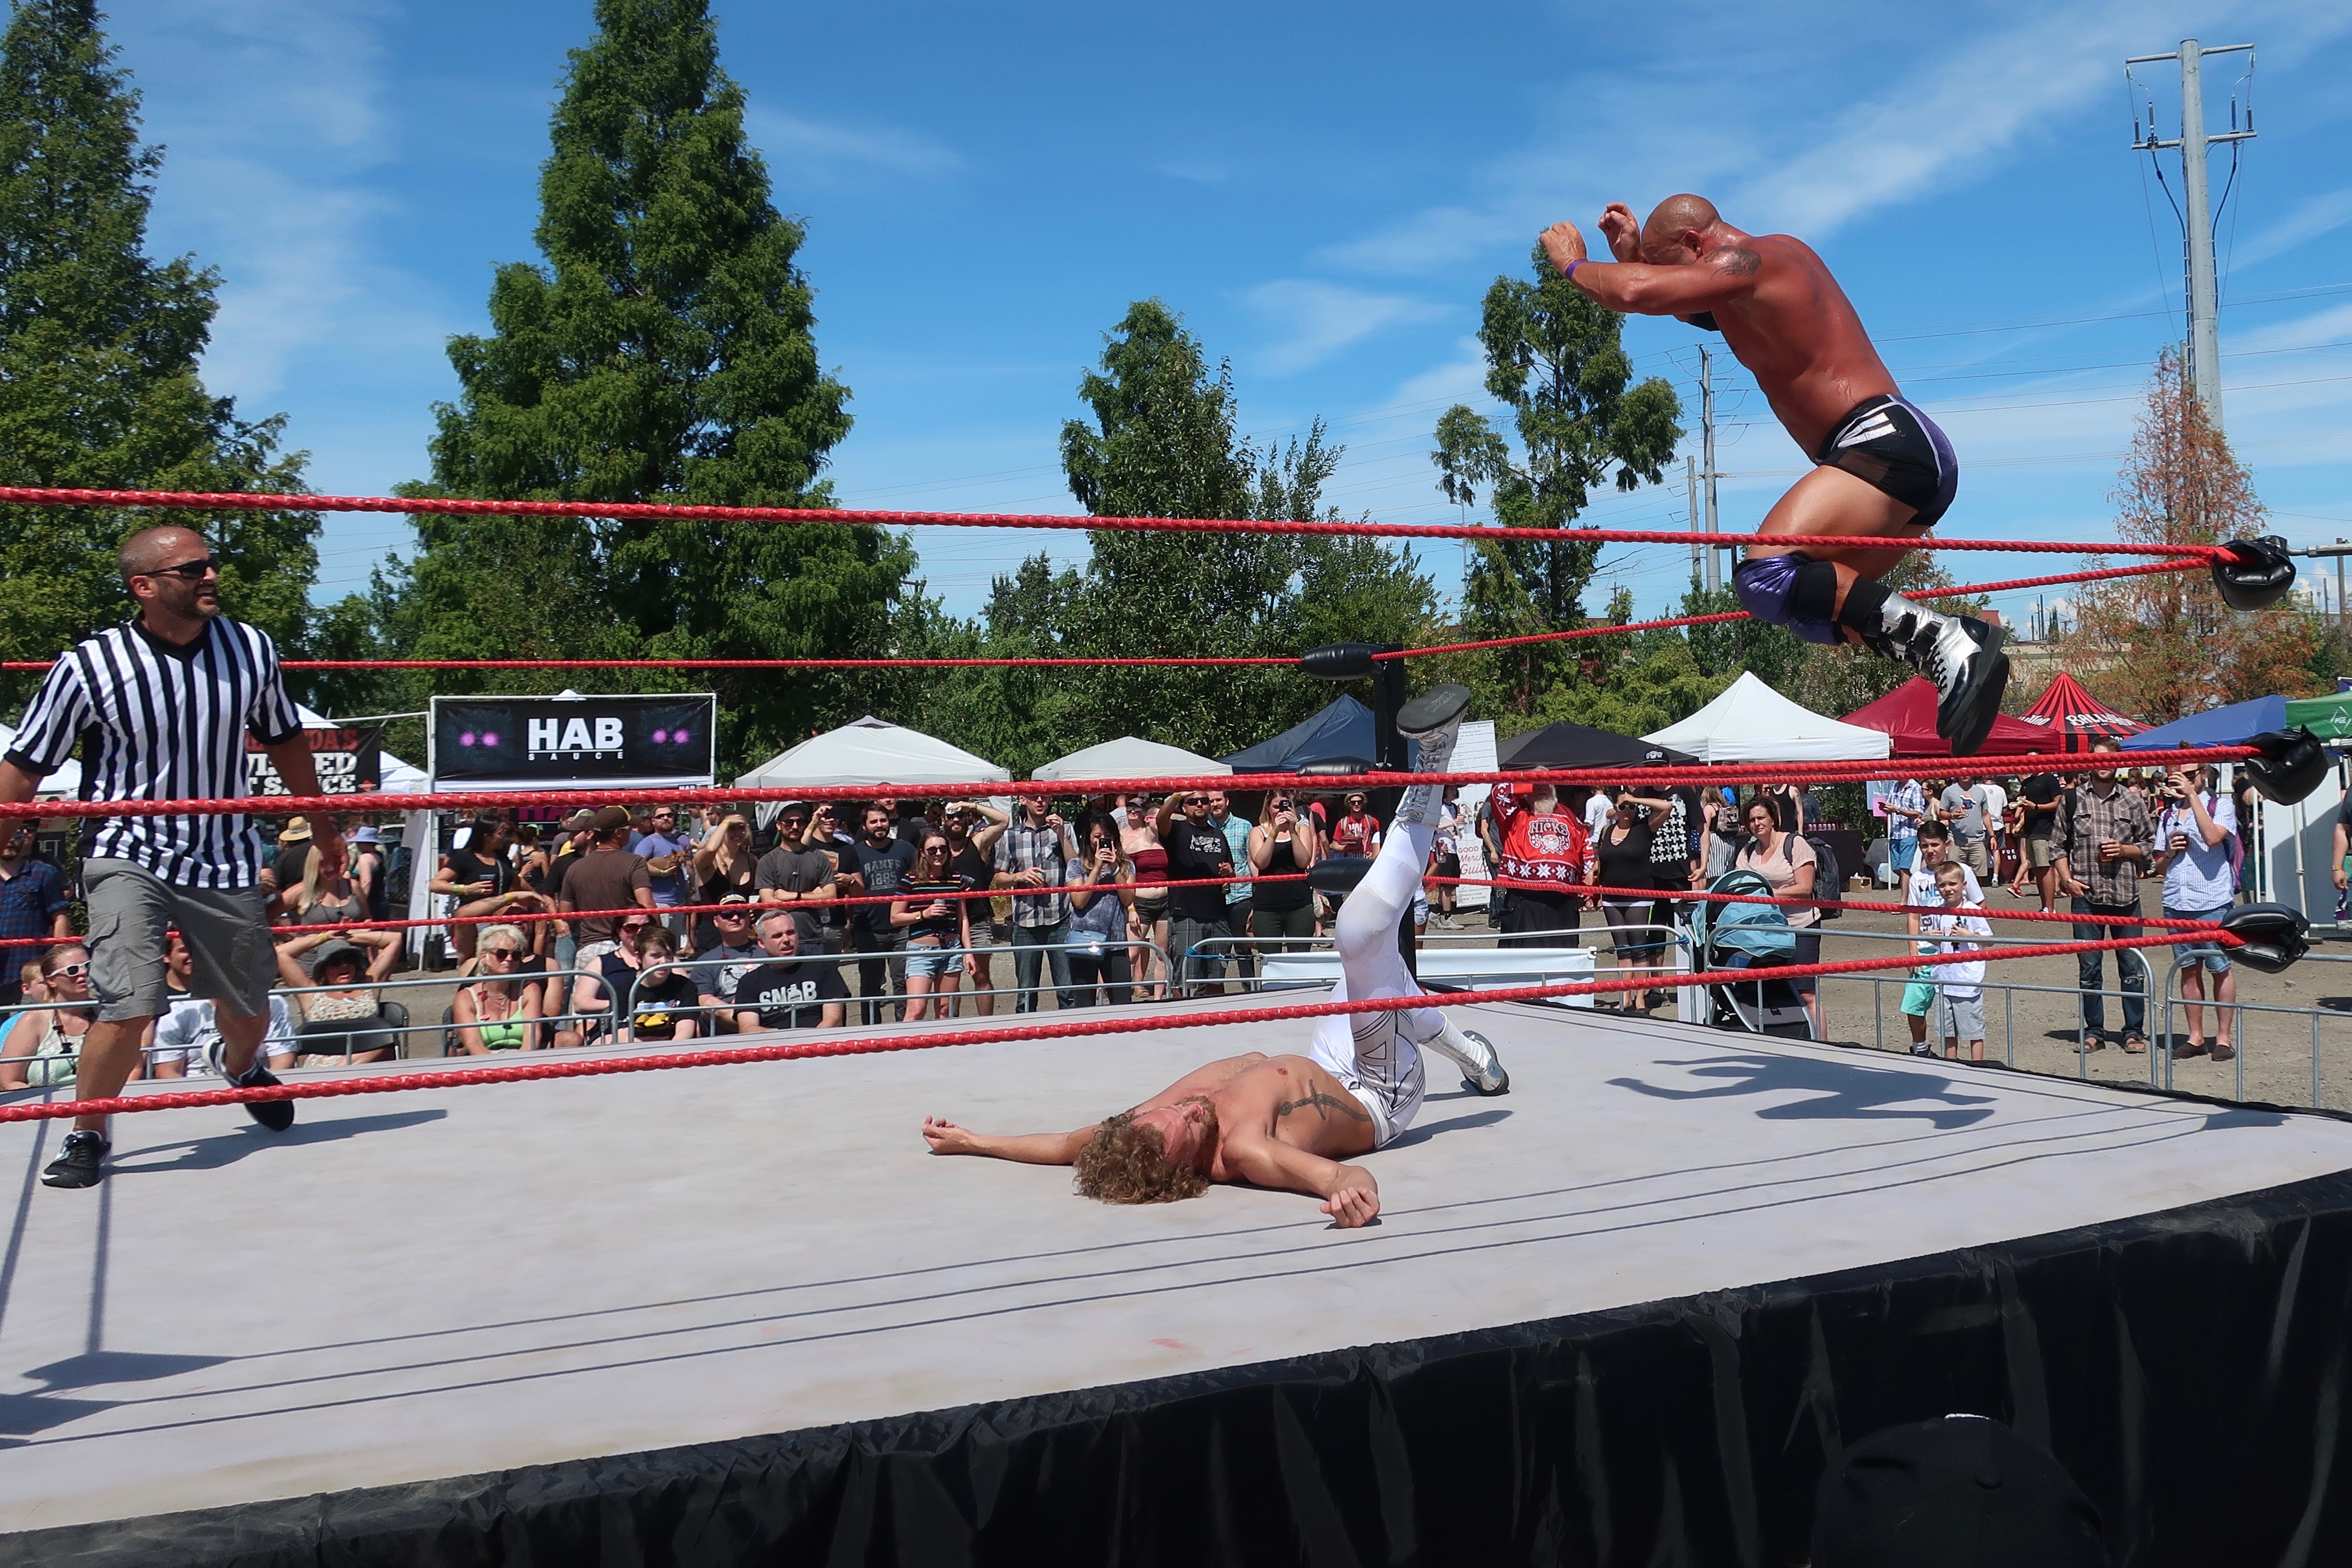 Action packed wrestling is part of the PDX Hot Sauce Expo in Portland, Oregon.